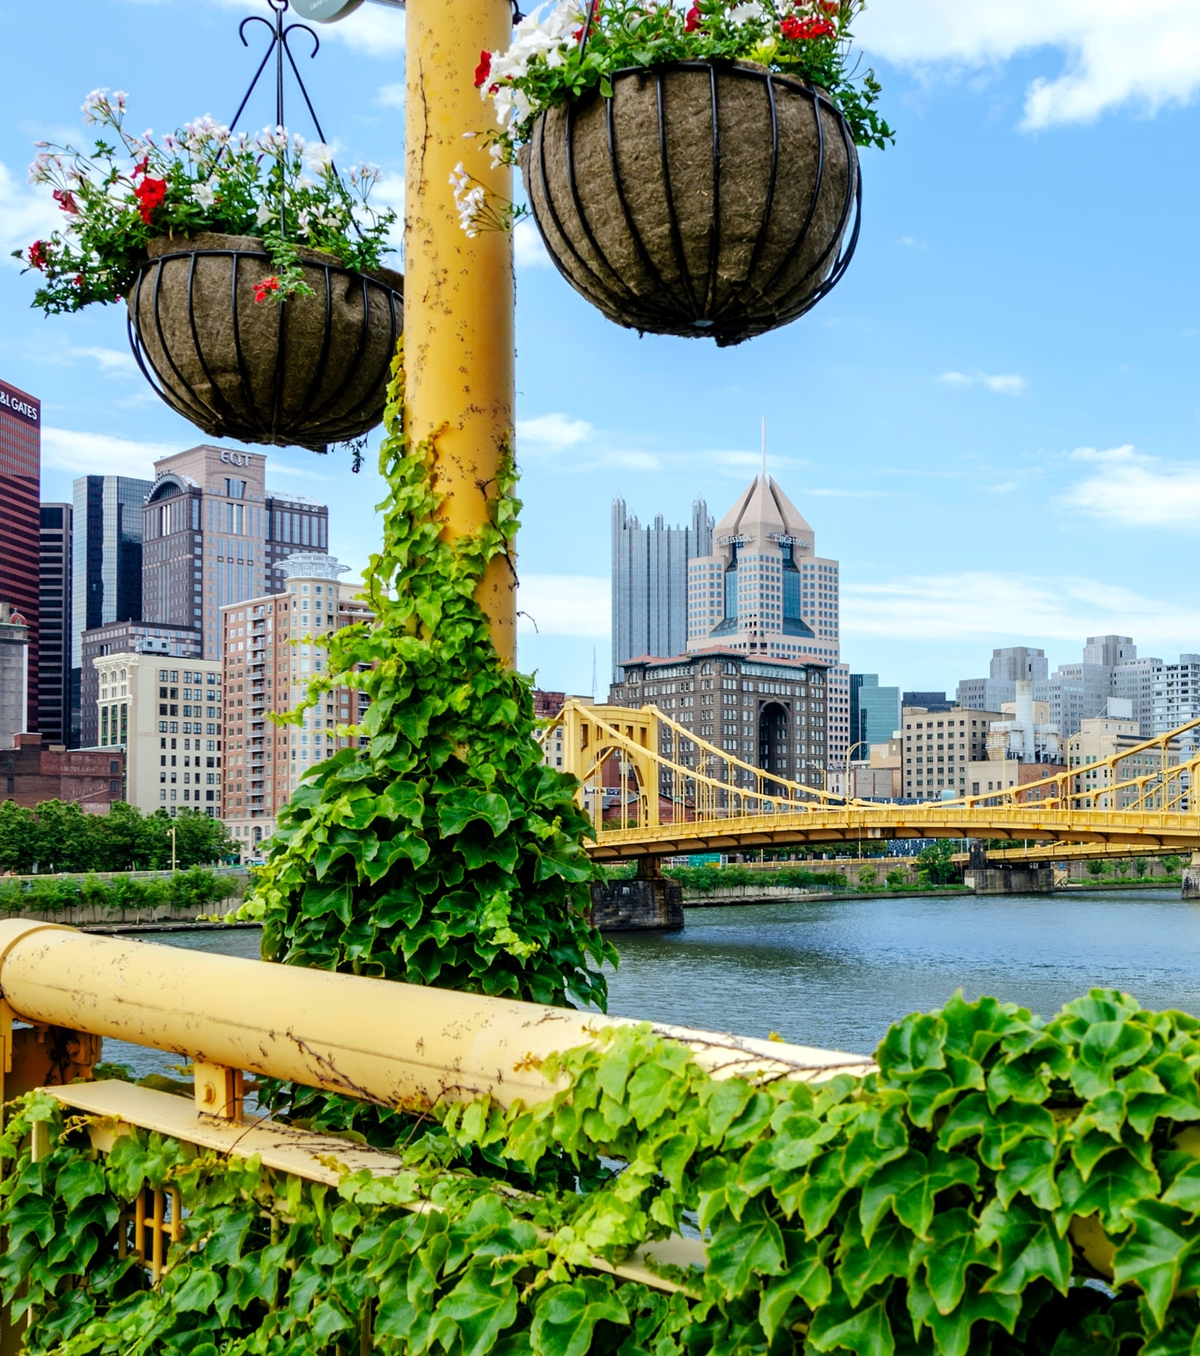 Private Sector Partners Step Up Investment in Downtown Pittsburgh to Enhance Downtown’s Attractiveness, Cleanliness & Safety